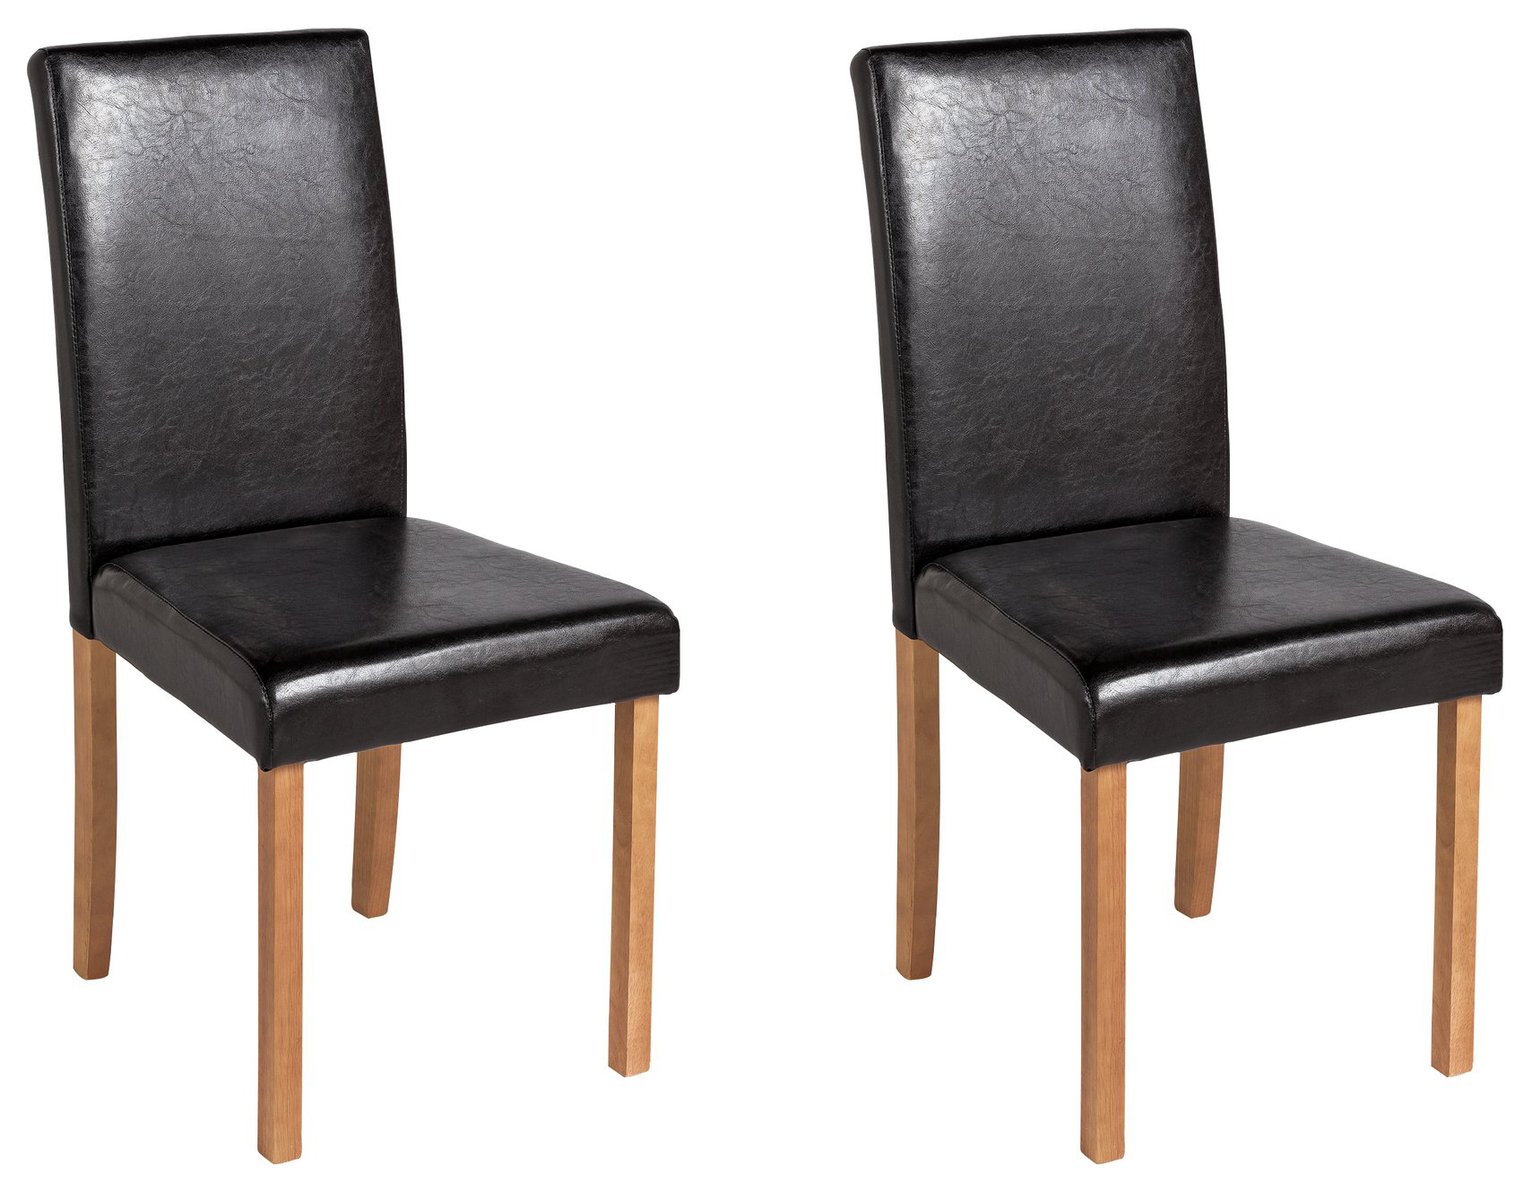 Argos Home Pair of Leather Effect Mid Back Chairs -  Black